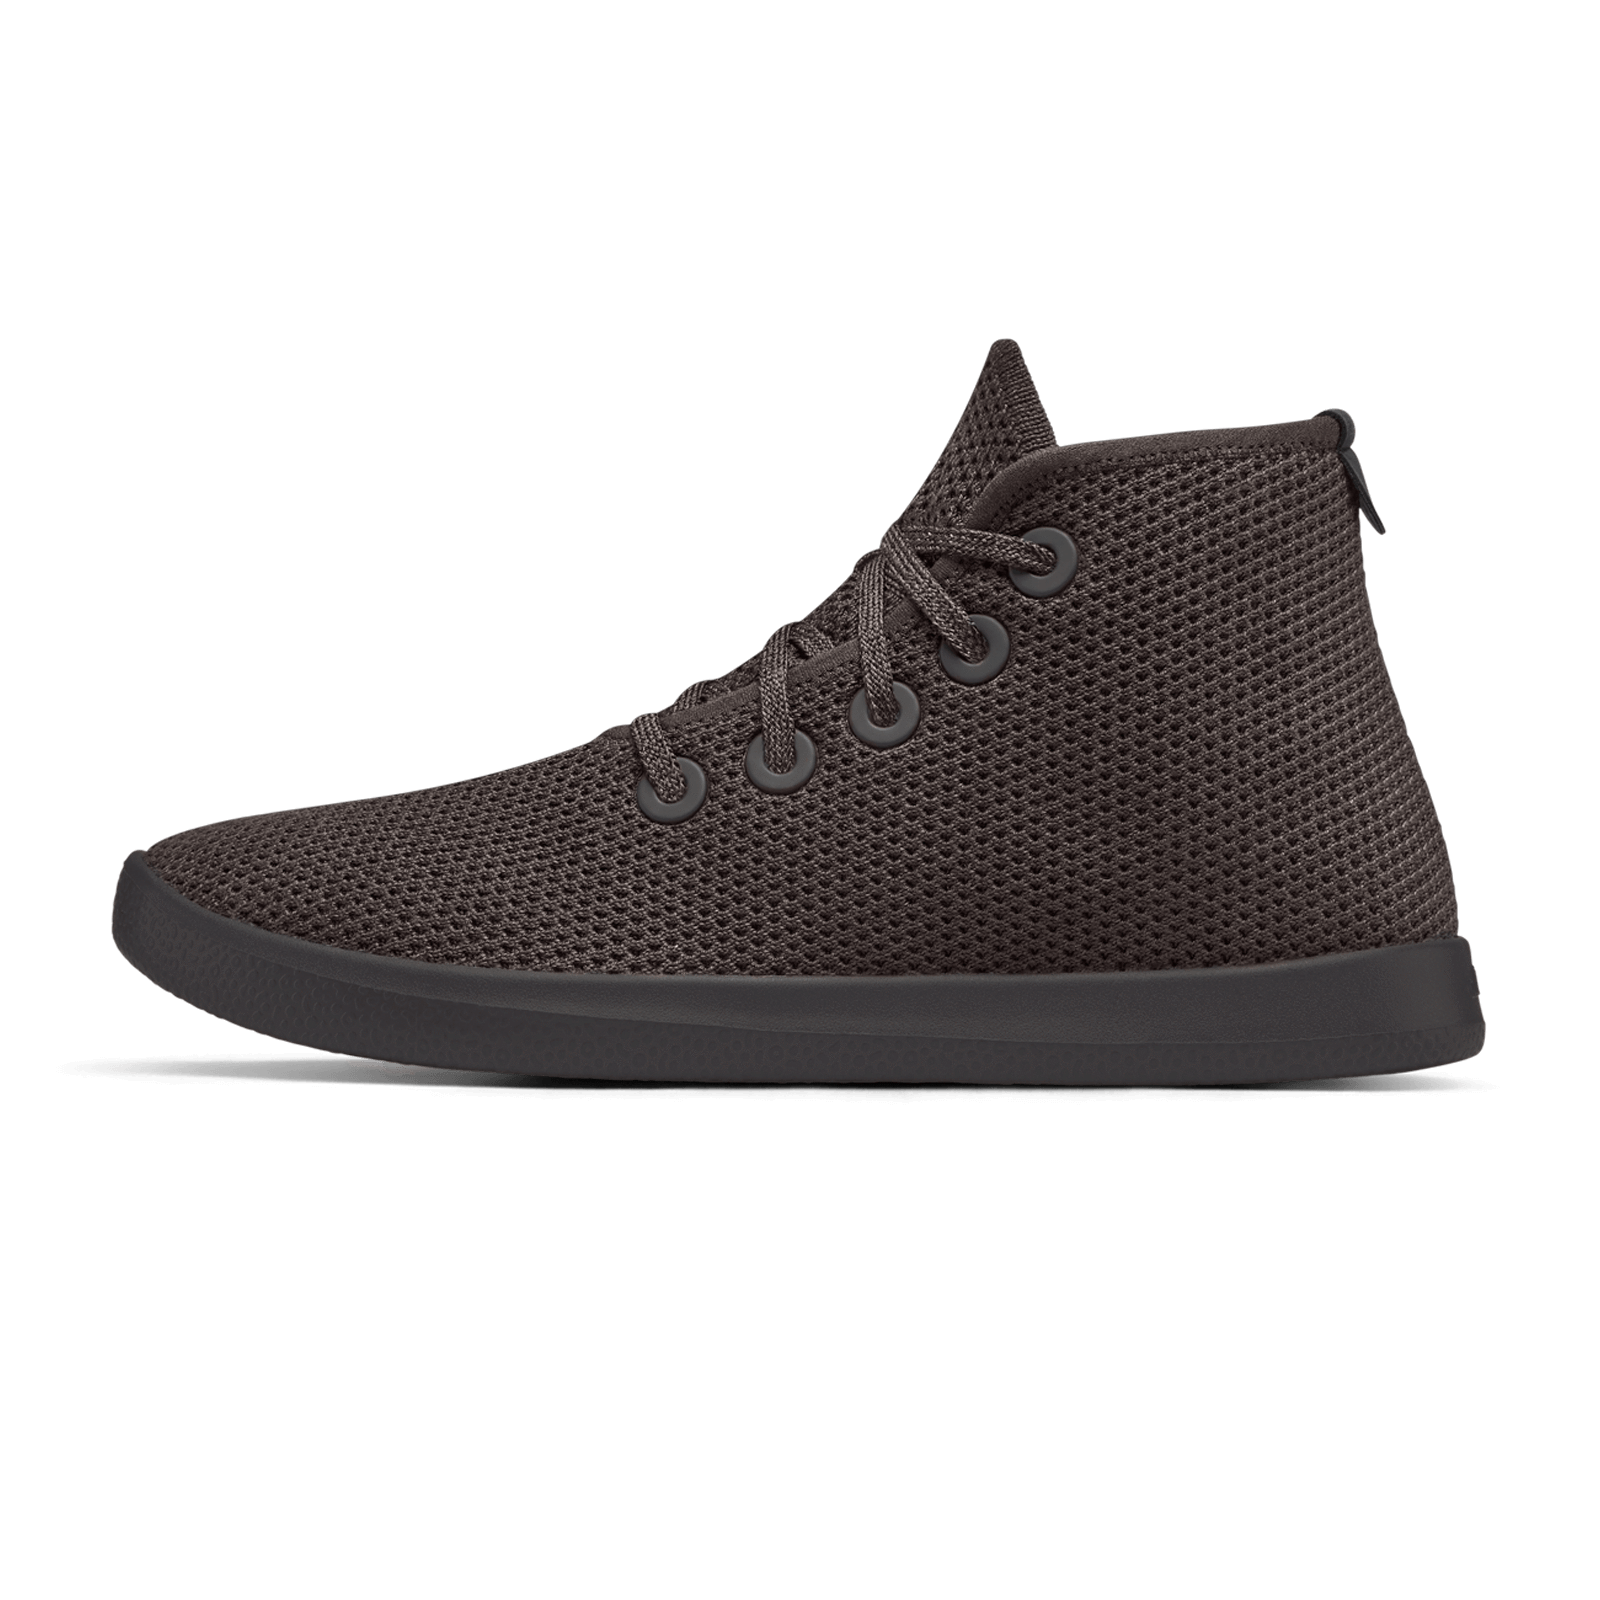 Men's Tree Toppers - Charcoal (Charcoal Sole)